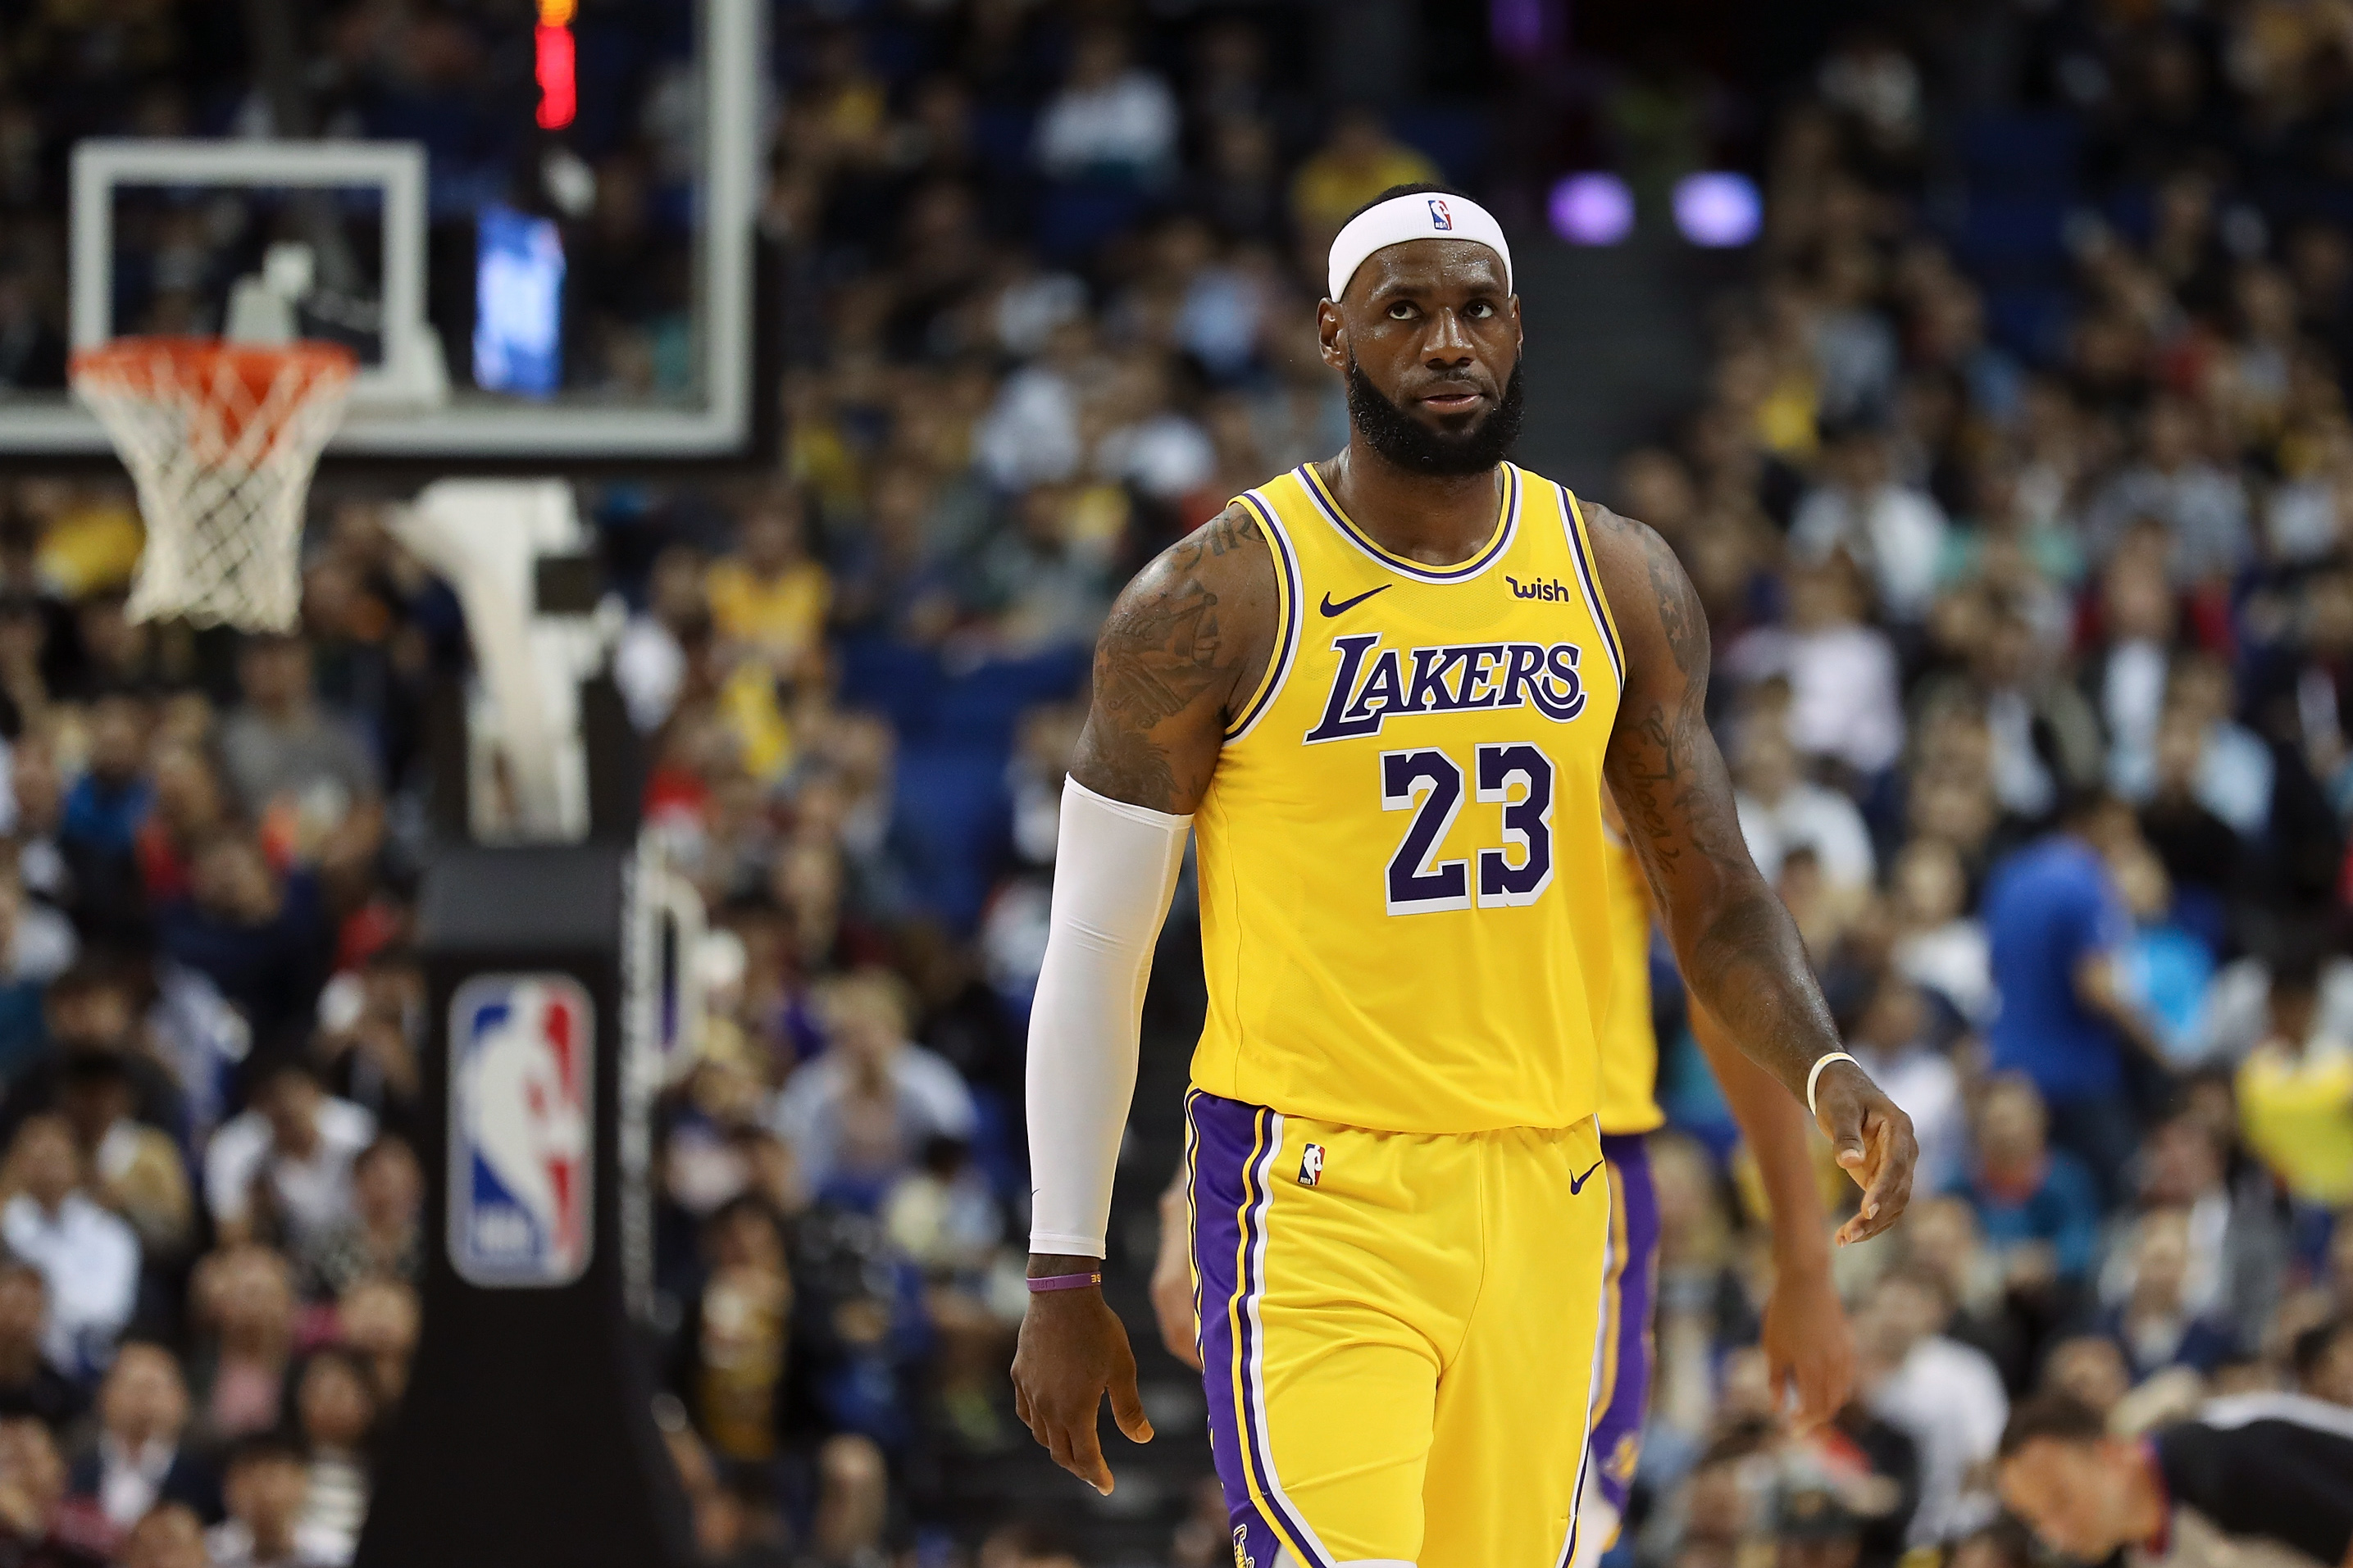 LeBron James Under Fire For Response To Tyre Nichols’ Death